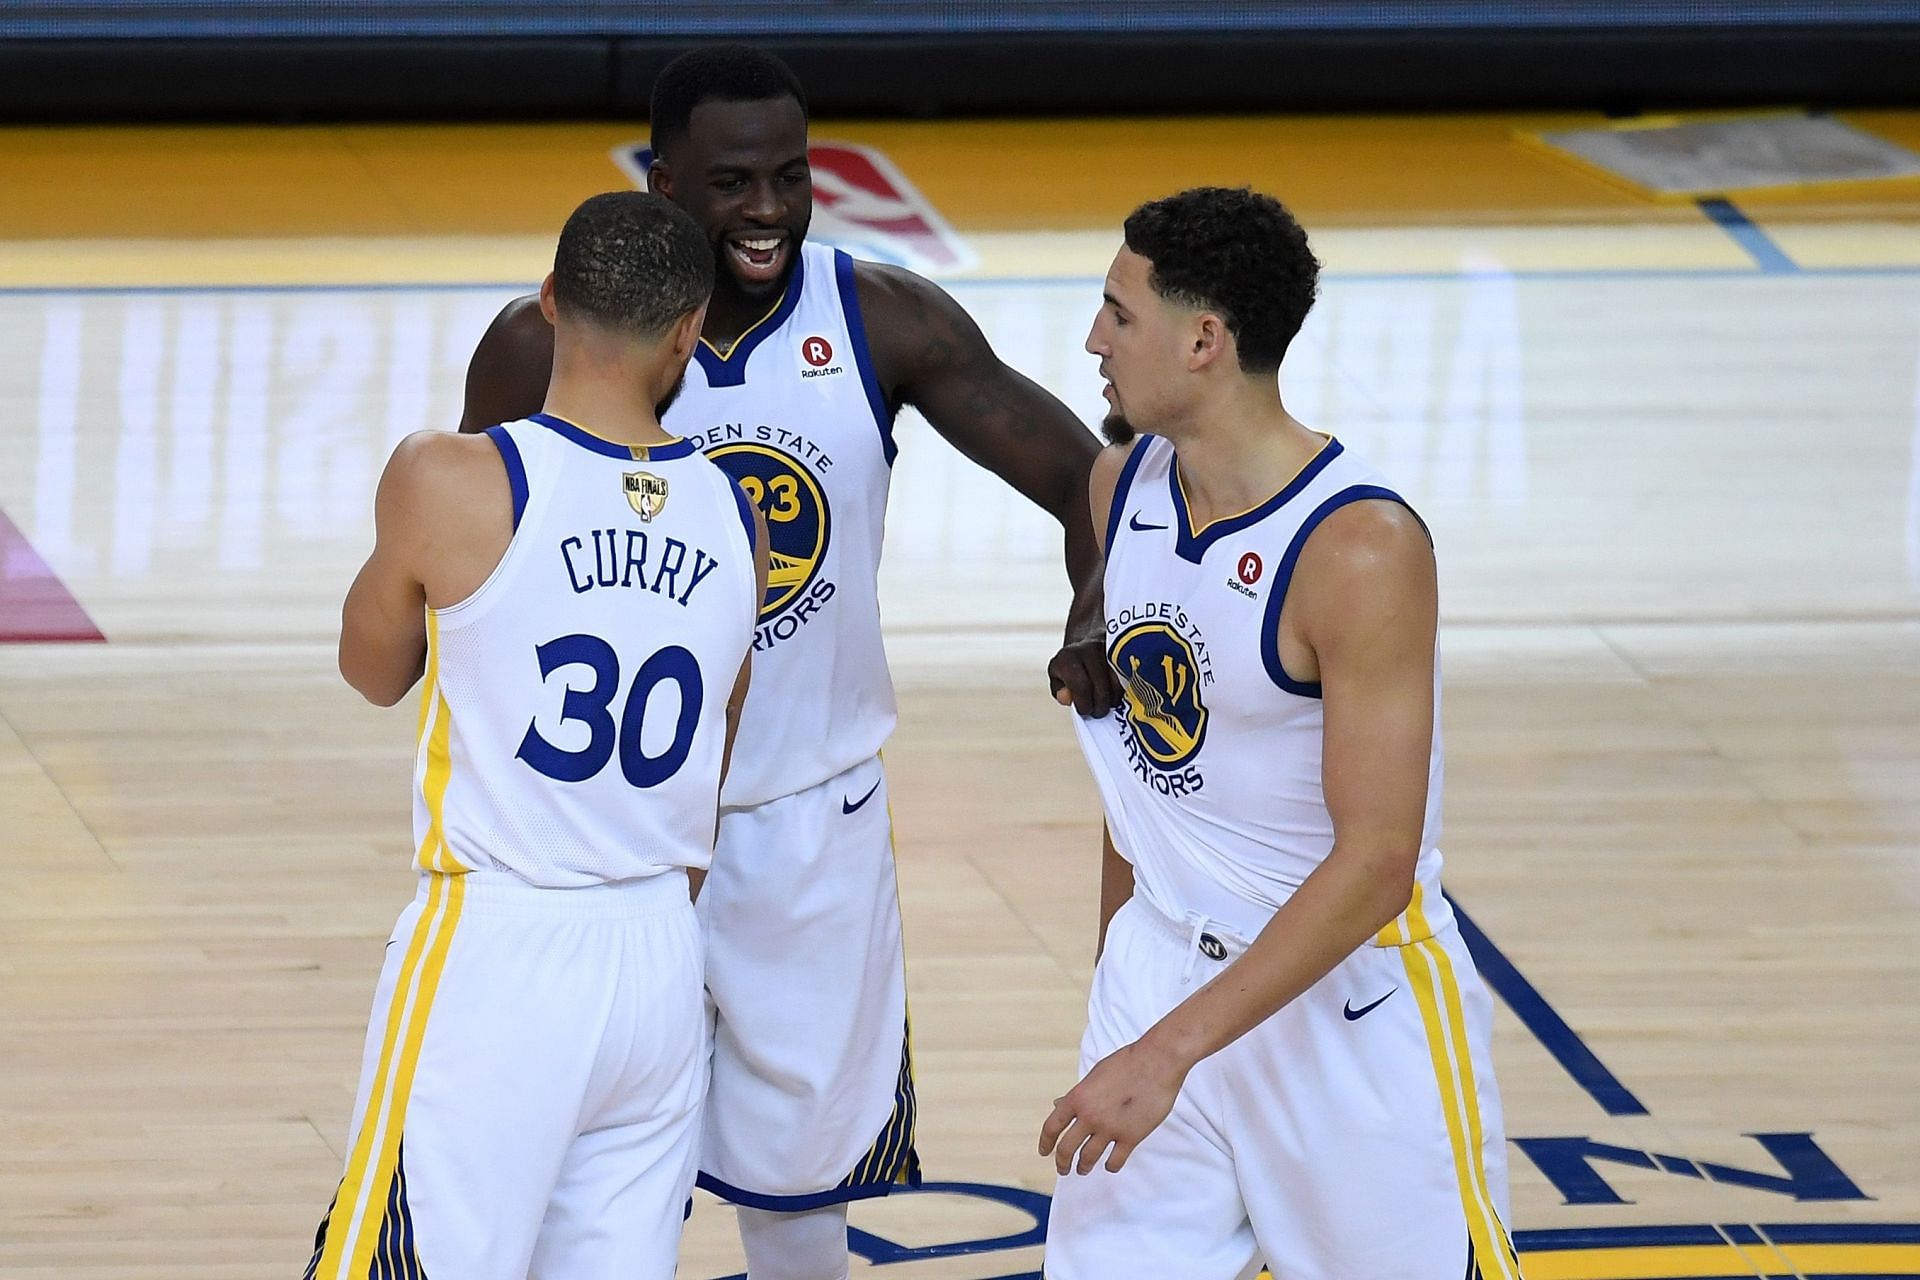 The Golden State trio of Steph Curry, Draymond Green and Klay Thompson